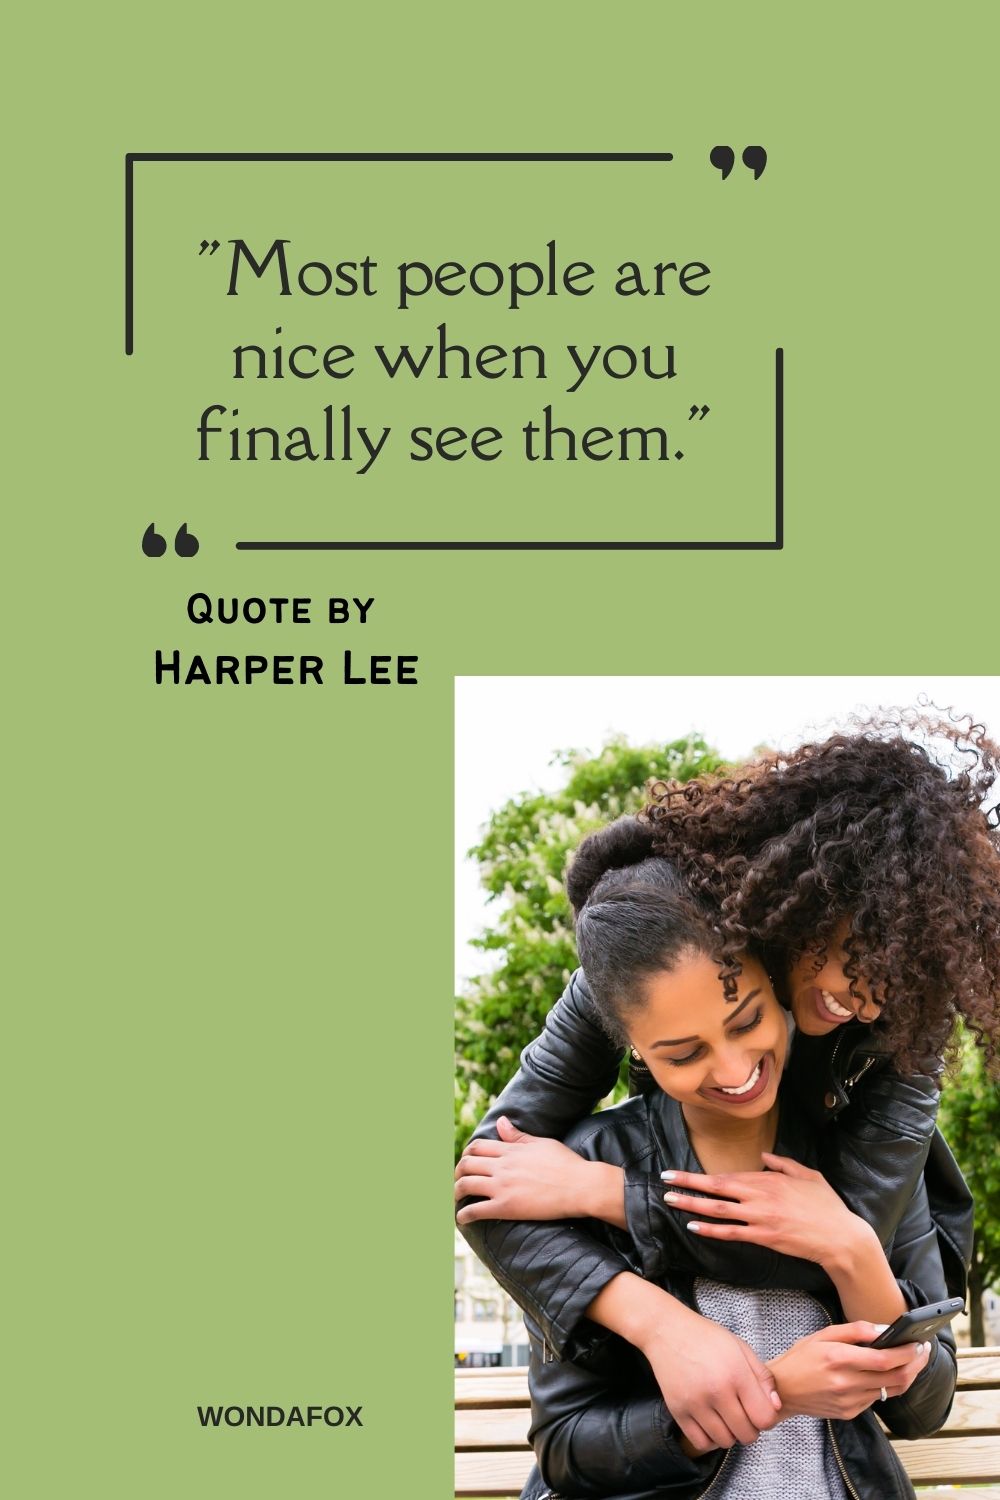 "Most people are nice when you finally see them."
Harper Lee